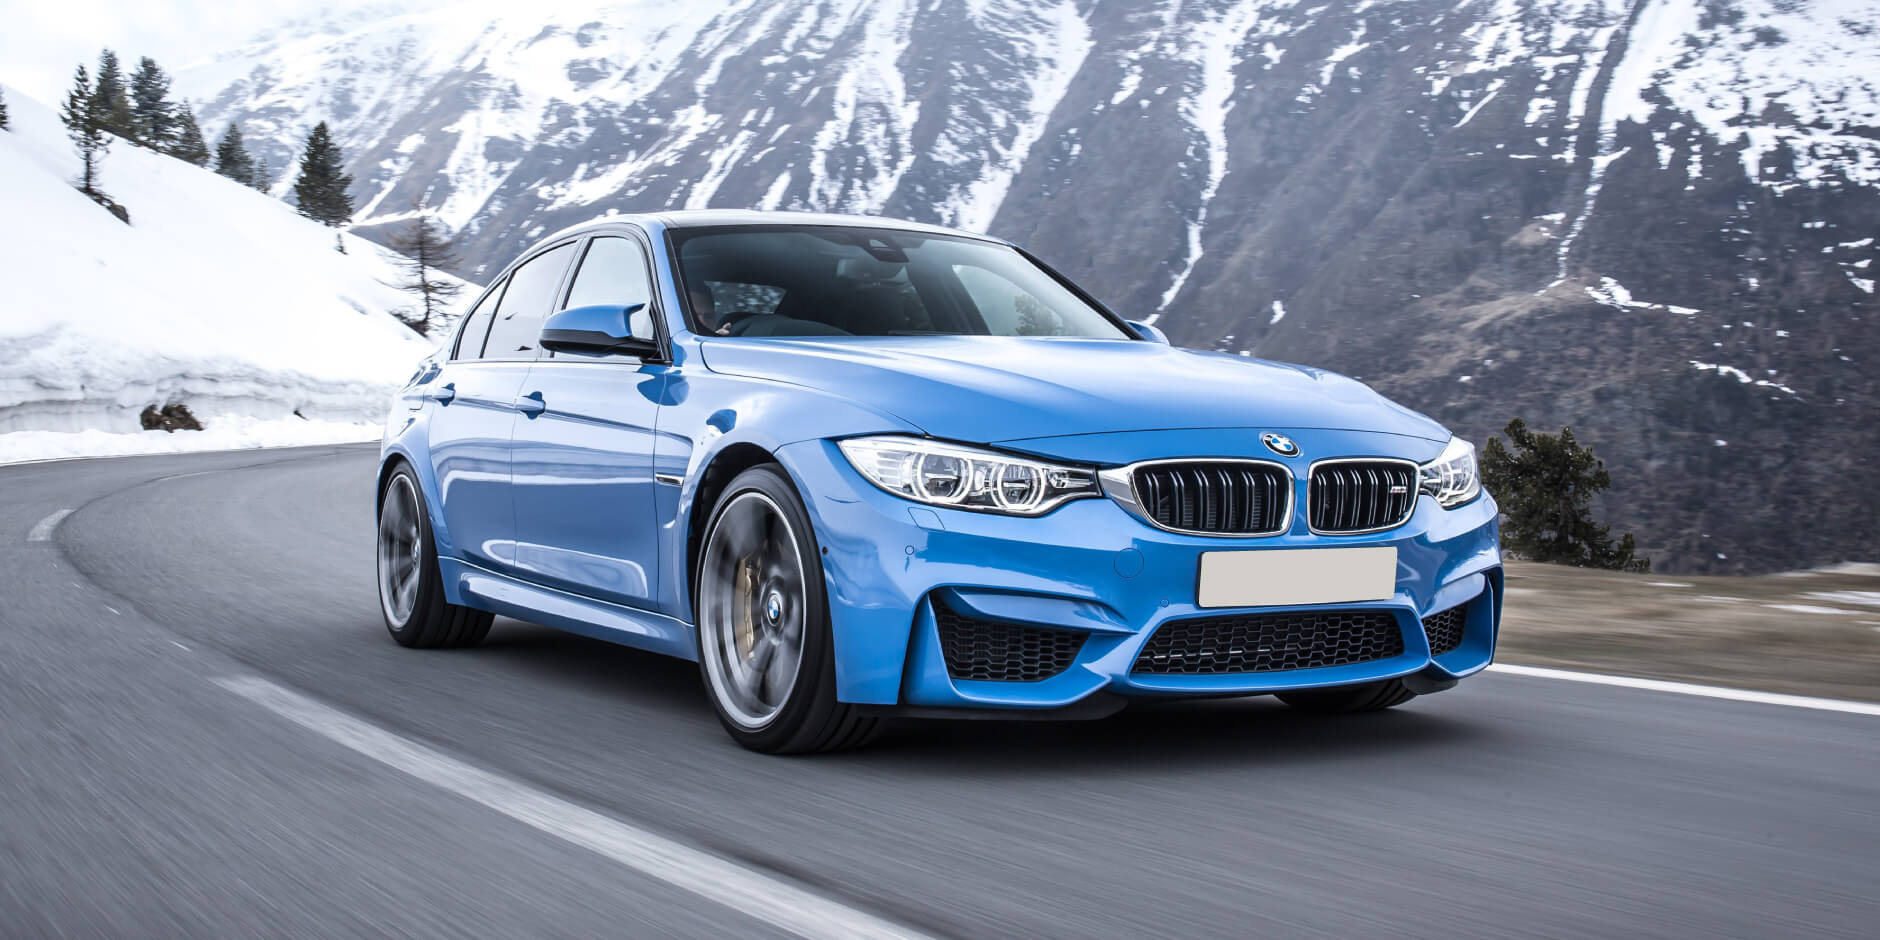 Top 5 Tips for Getting the Best Out of Your BMW Sports Car Hire Experience